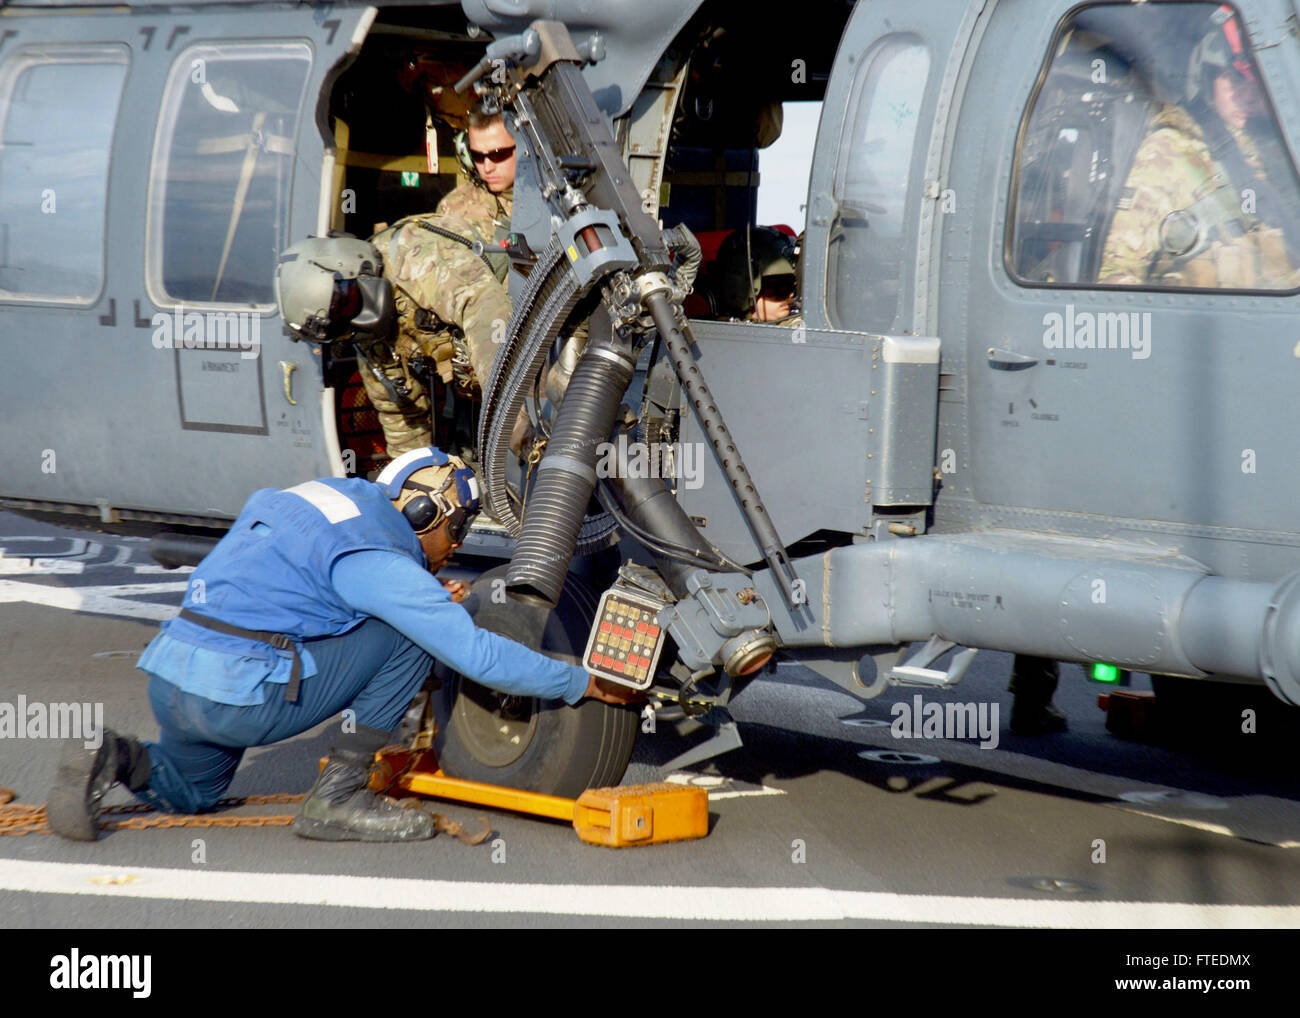 140418-N-CH661-492: MEDITERRANEAN SEA (April 18, 2014) - Boatswain’s Mate Seaman Jeremiah Bennett secures tie-down chains on a U.S. Air Force HH-60G Pave Hawk helicopter on the flight deck of the guided-missile destroyer USS Ramage (DDG 61). Ramage, homeported in Norfolk, Va., is on a scheduled deployment supporting maritime security operations and theater security cooperation efforts in the U.S. 6th Fleet area of operations. (U.S. Navy photo by Mass Communication Specialist 2nd Class Jared King/Released)   Join the conversation on Twitter ( https://twitter.com/naveur navaf )  follow us on Fac Stock Photo